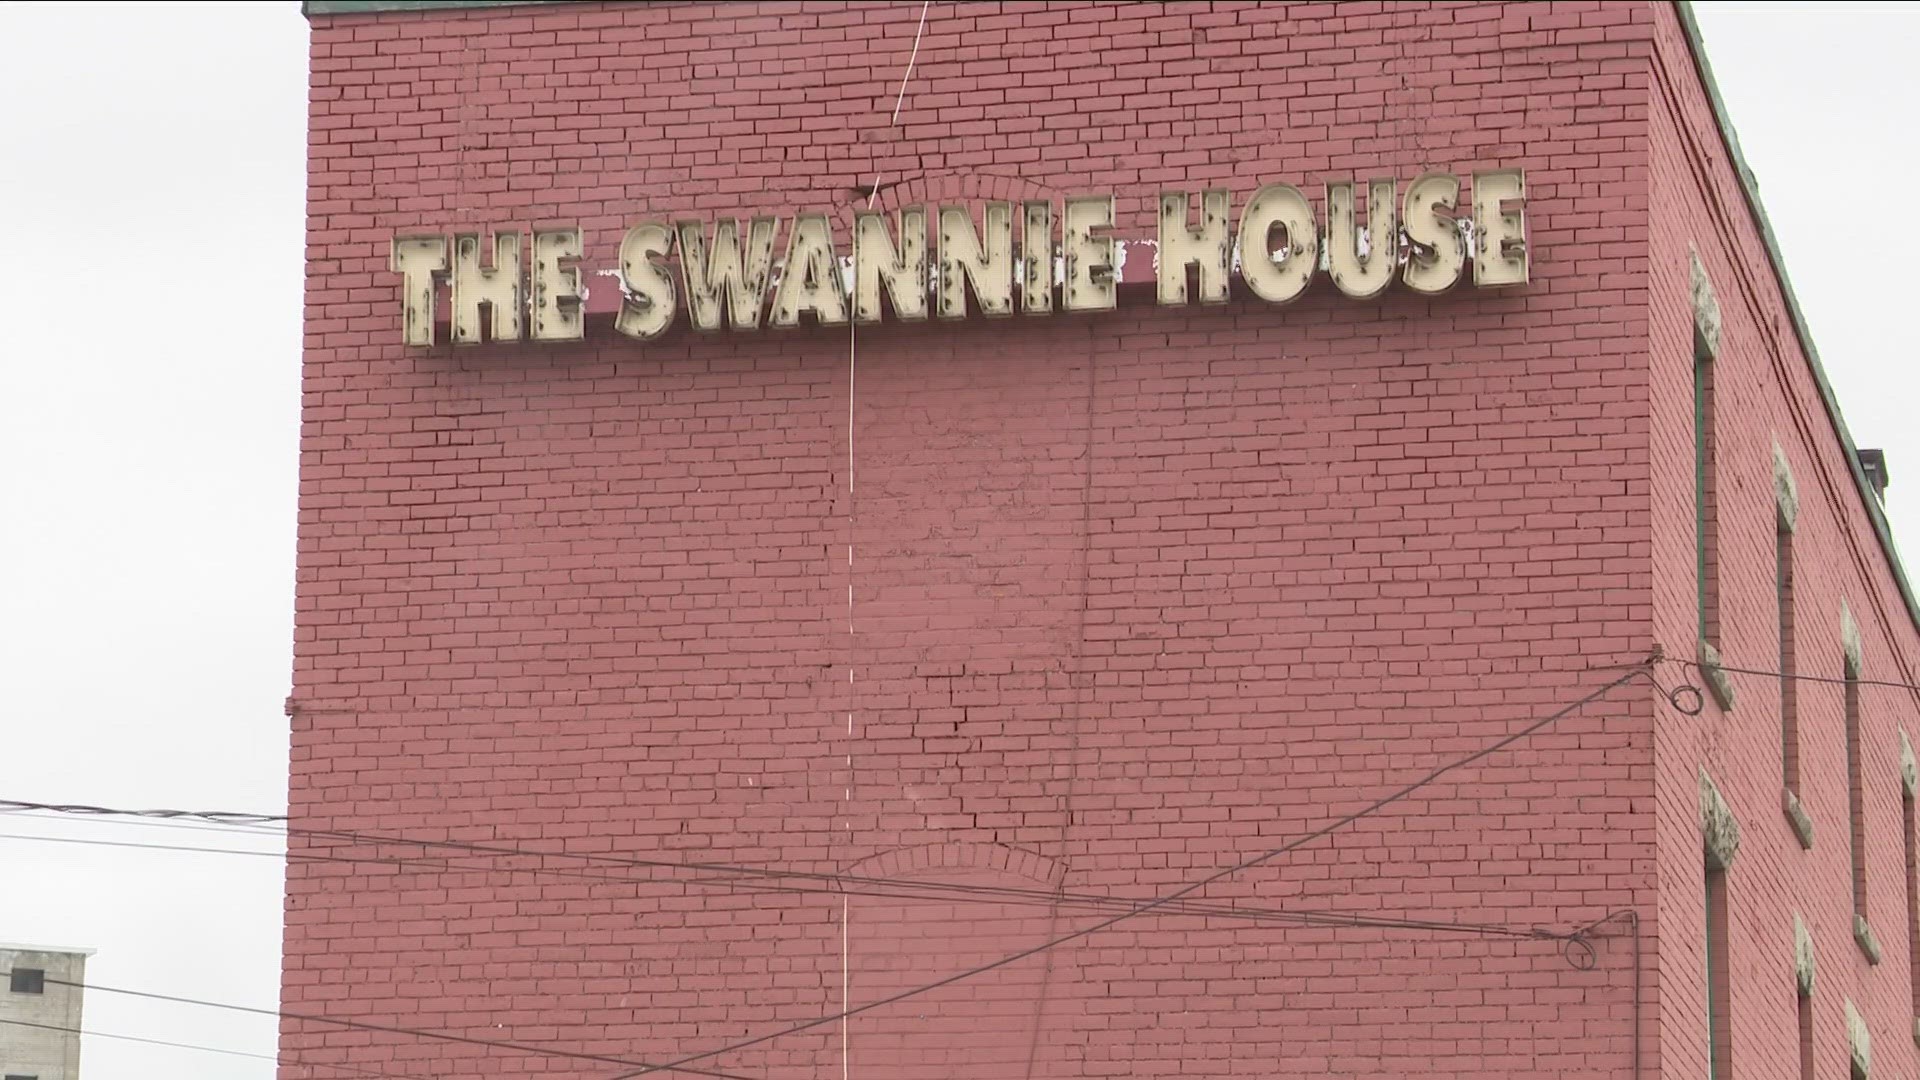 Swannie House announced it is closing after one of it's owners passed away